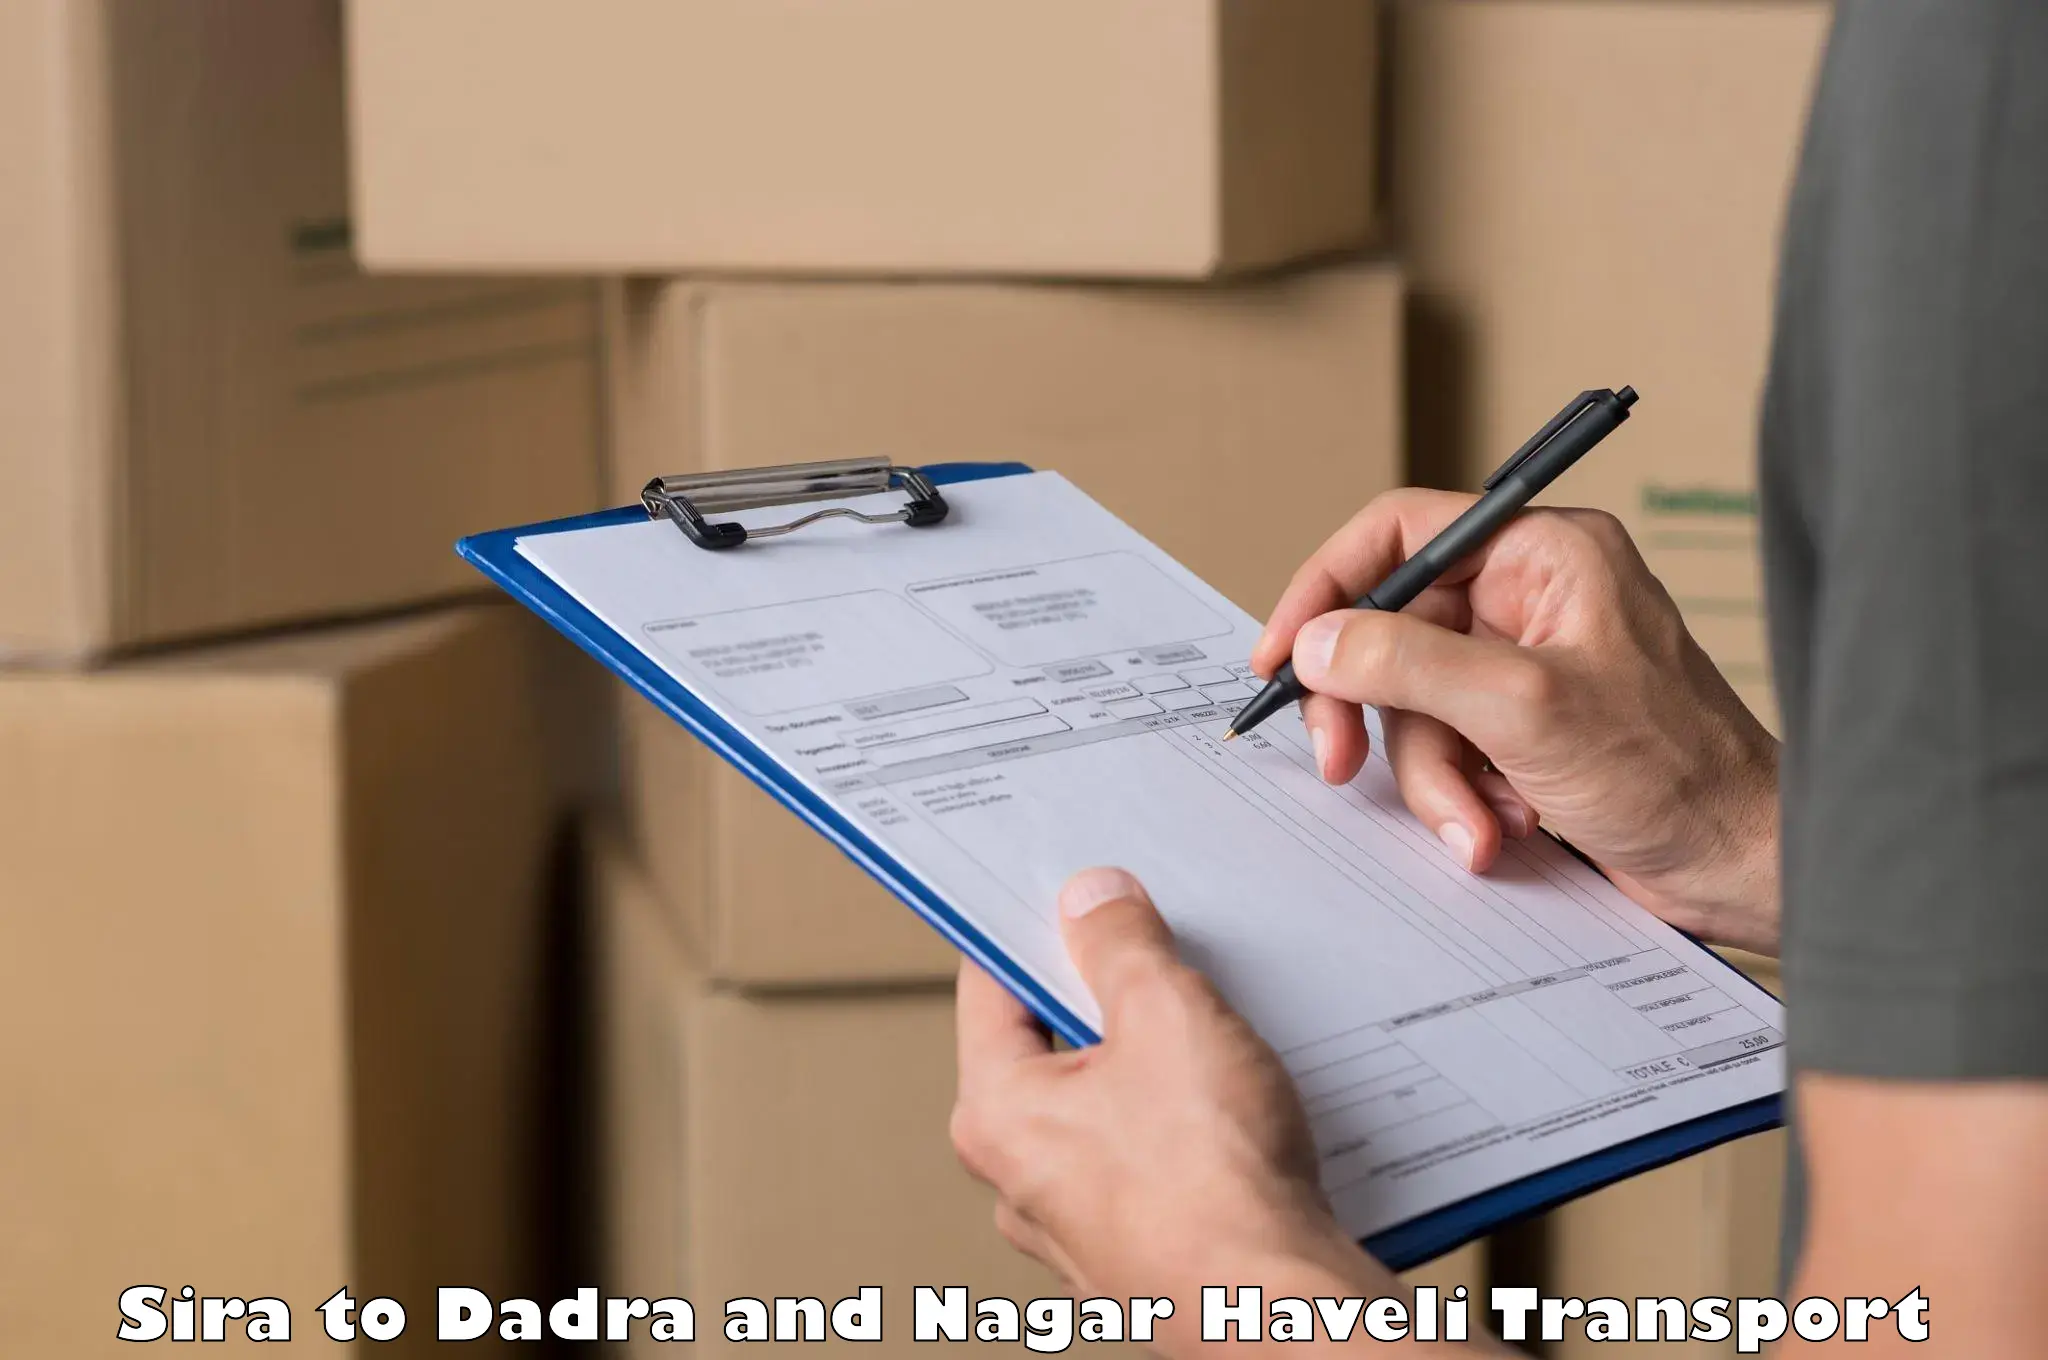 Transportation services in Sira to Dadra and Nagar Haveli